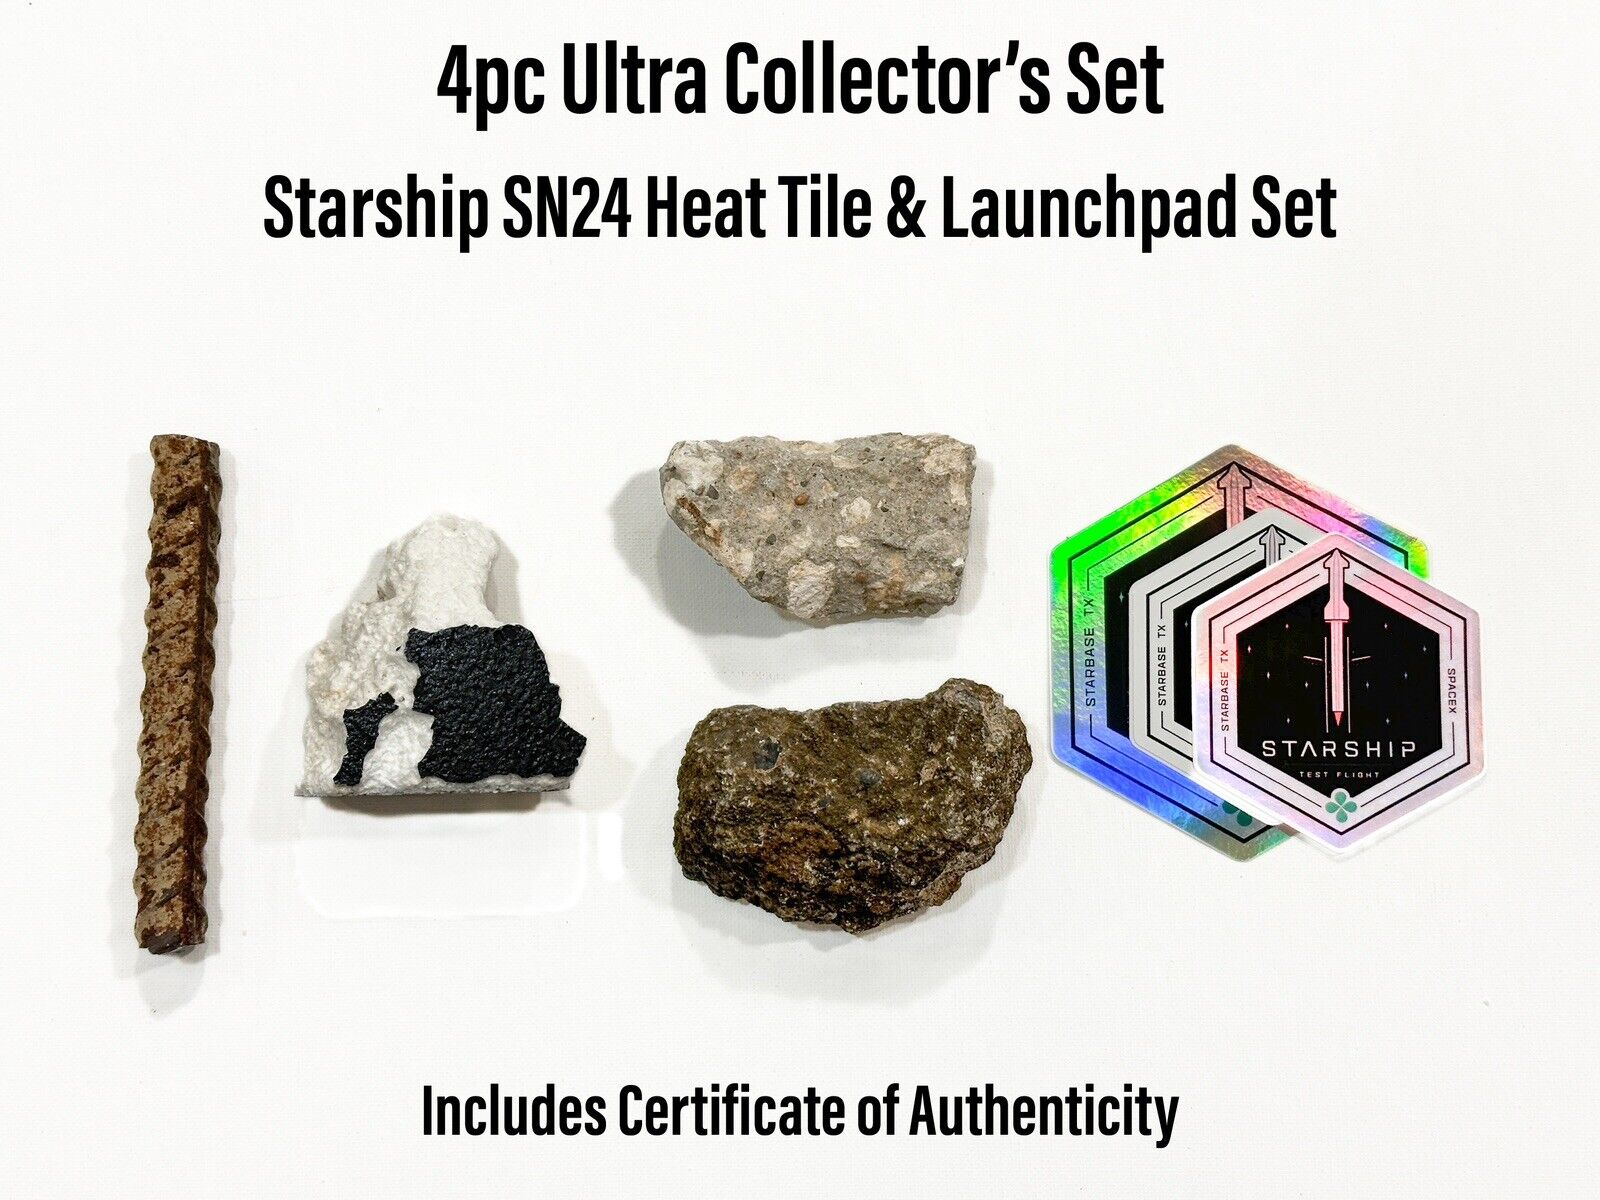 SpaceX Starship SN24 S24 Heat Shield Tile & Launchpad - 4 Piece Collector’s Set